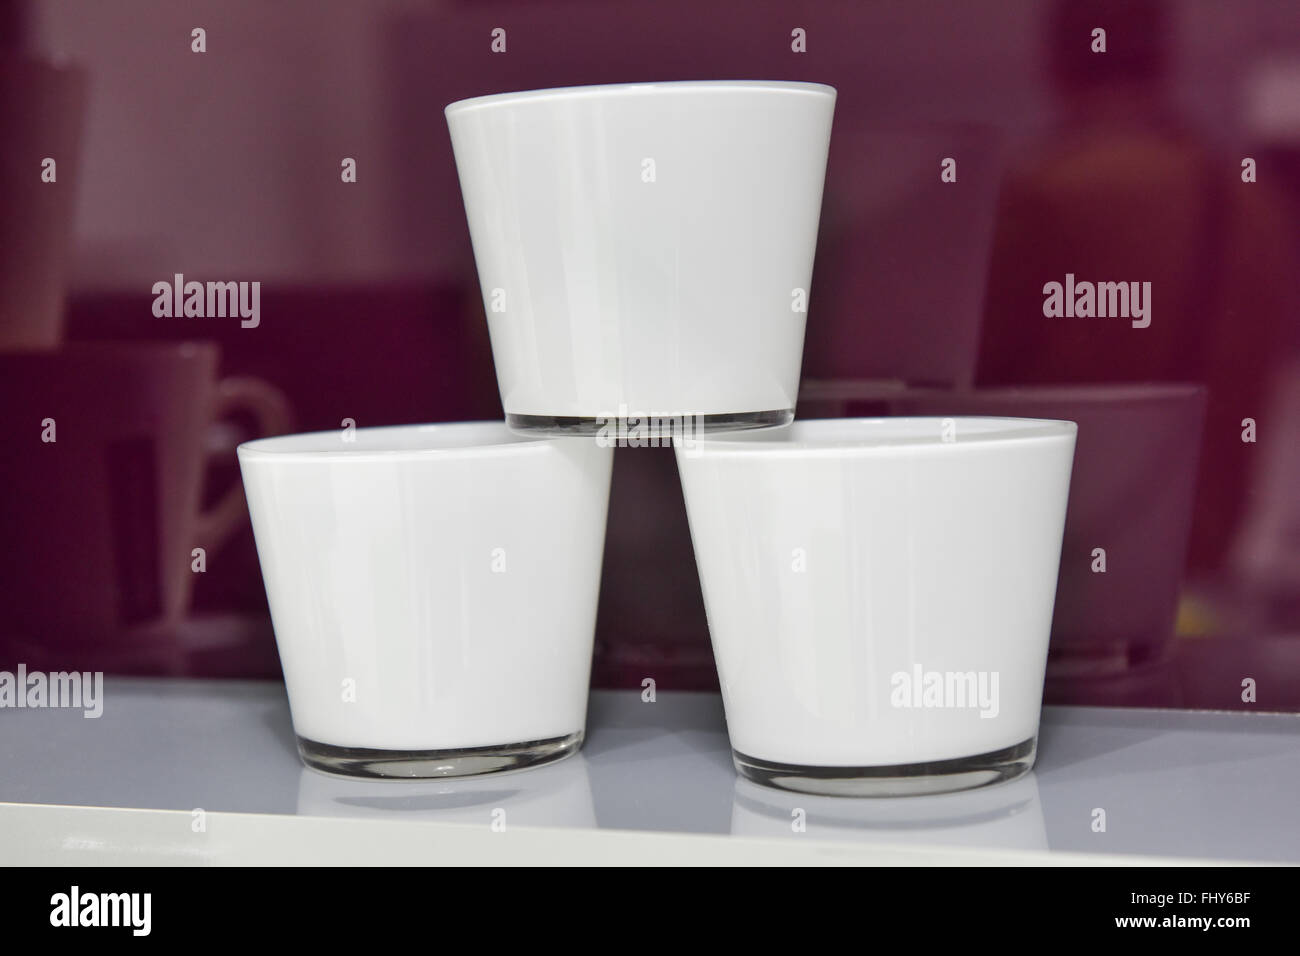 Three small white cups stacked on a kitchen shelf Stock Photo